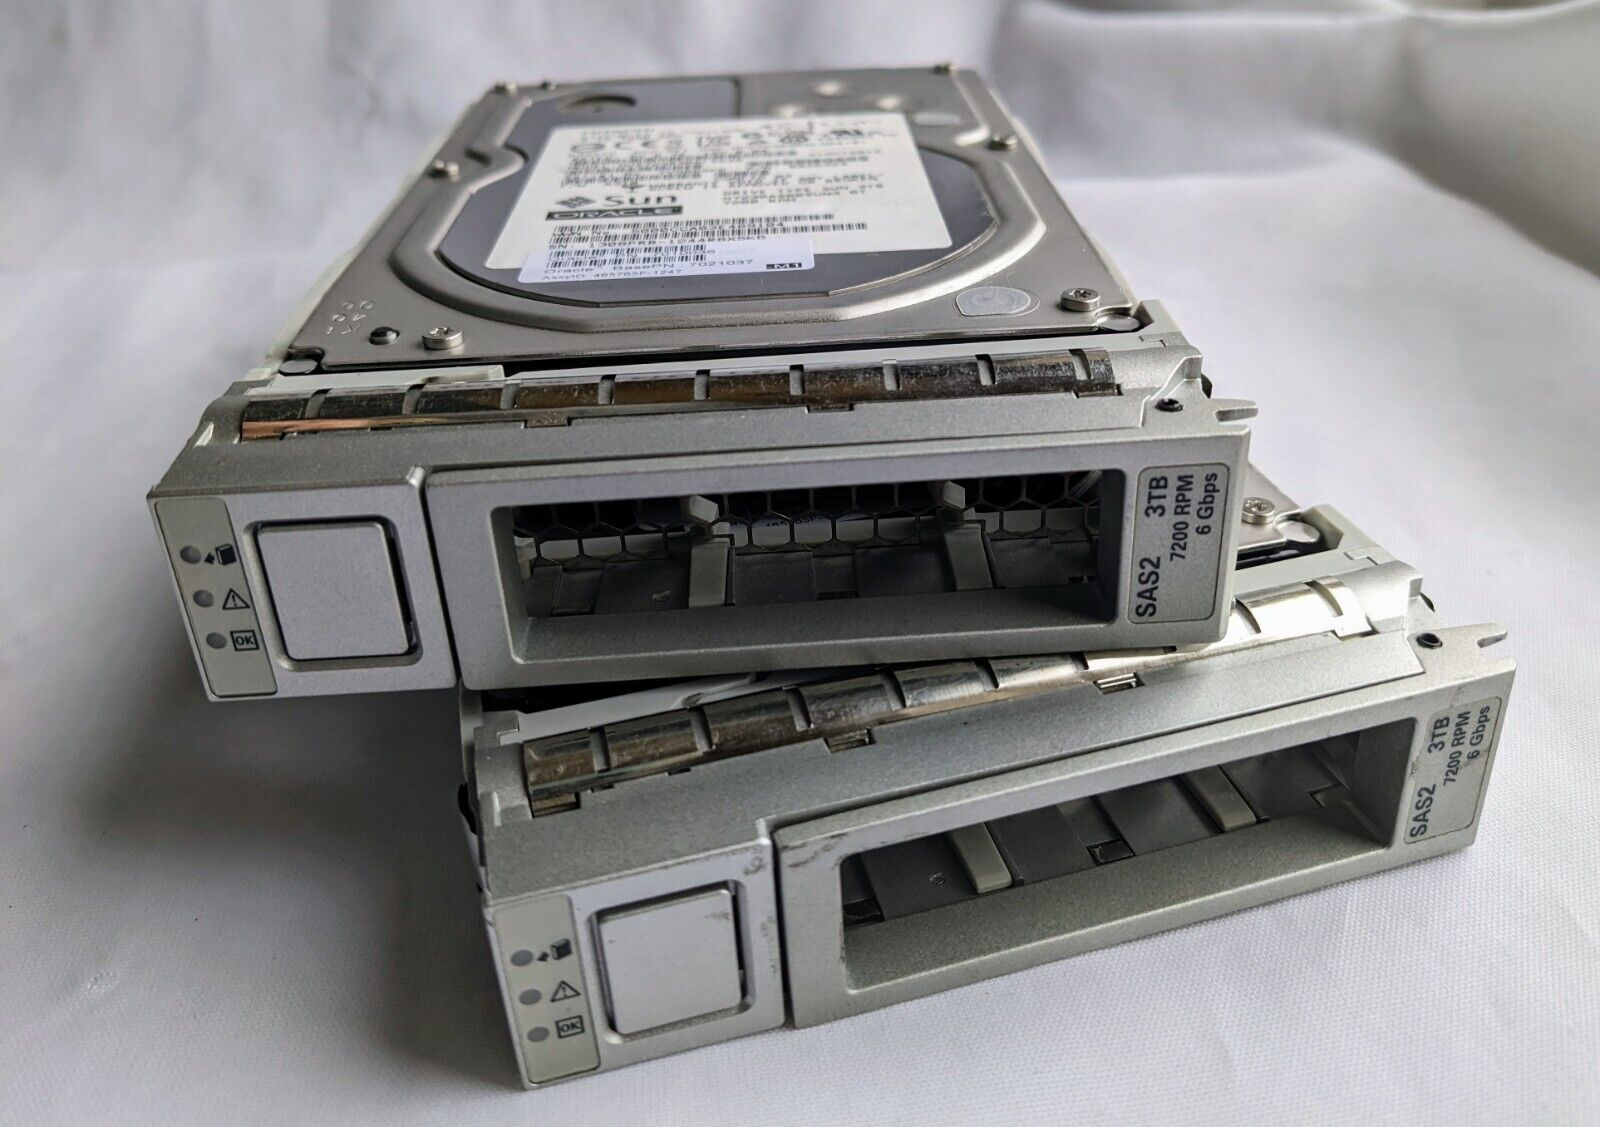 Lot of 4 Sun Oracle 7010036 7021037 3TB Disk w/Coral Bracket HUS723030ALS640